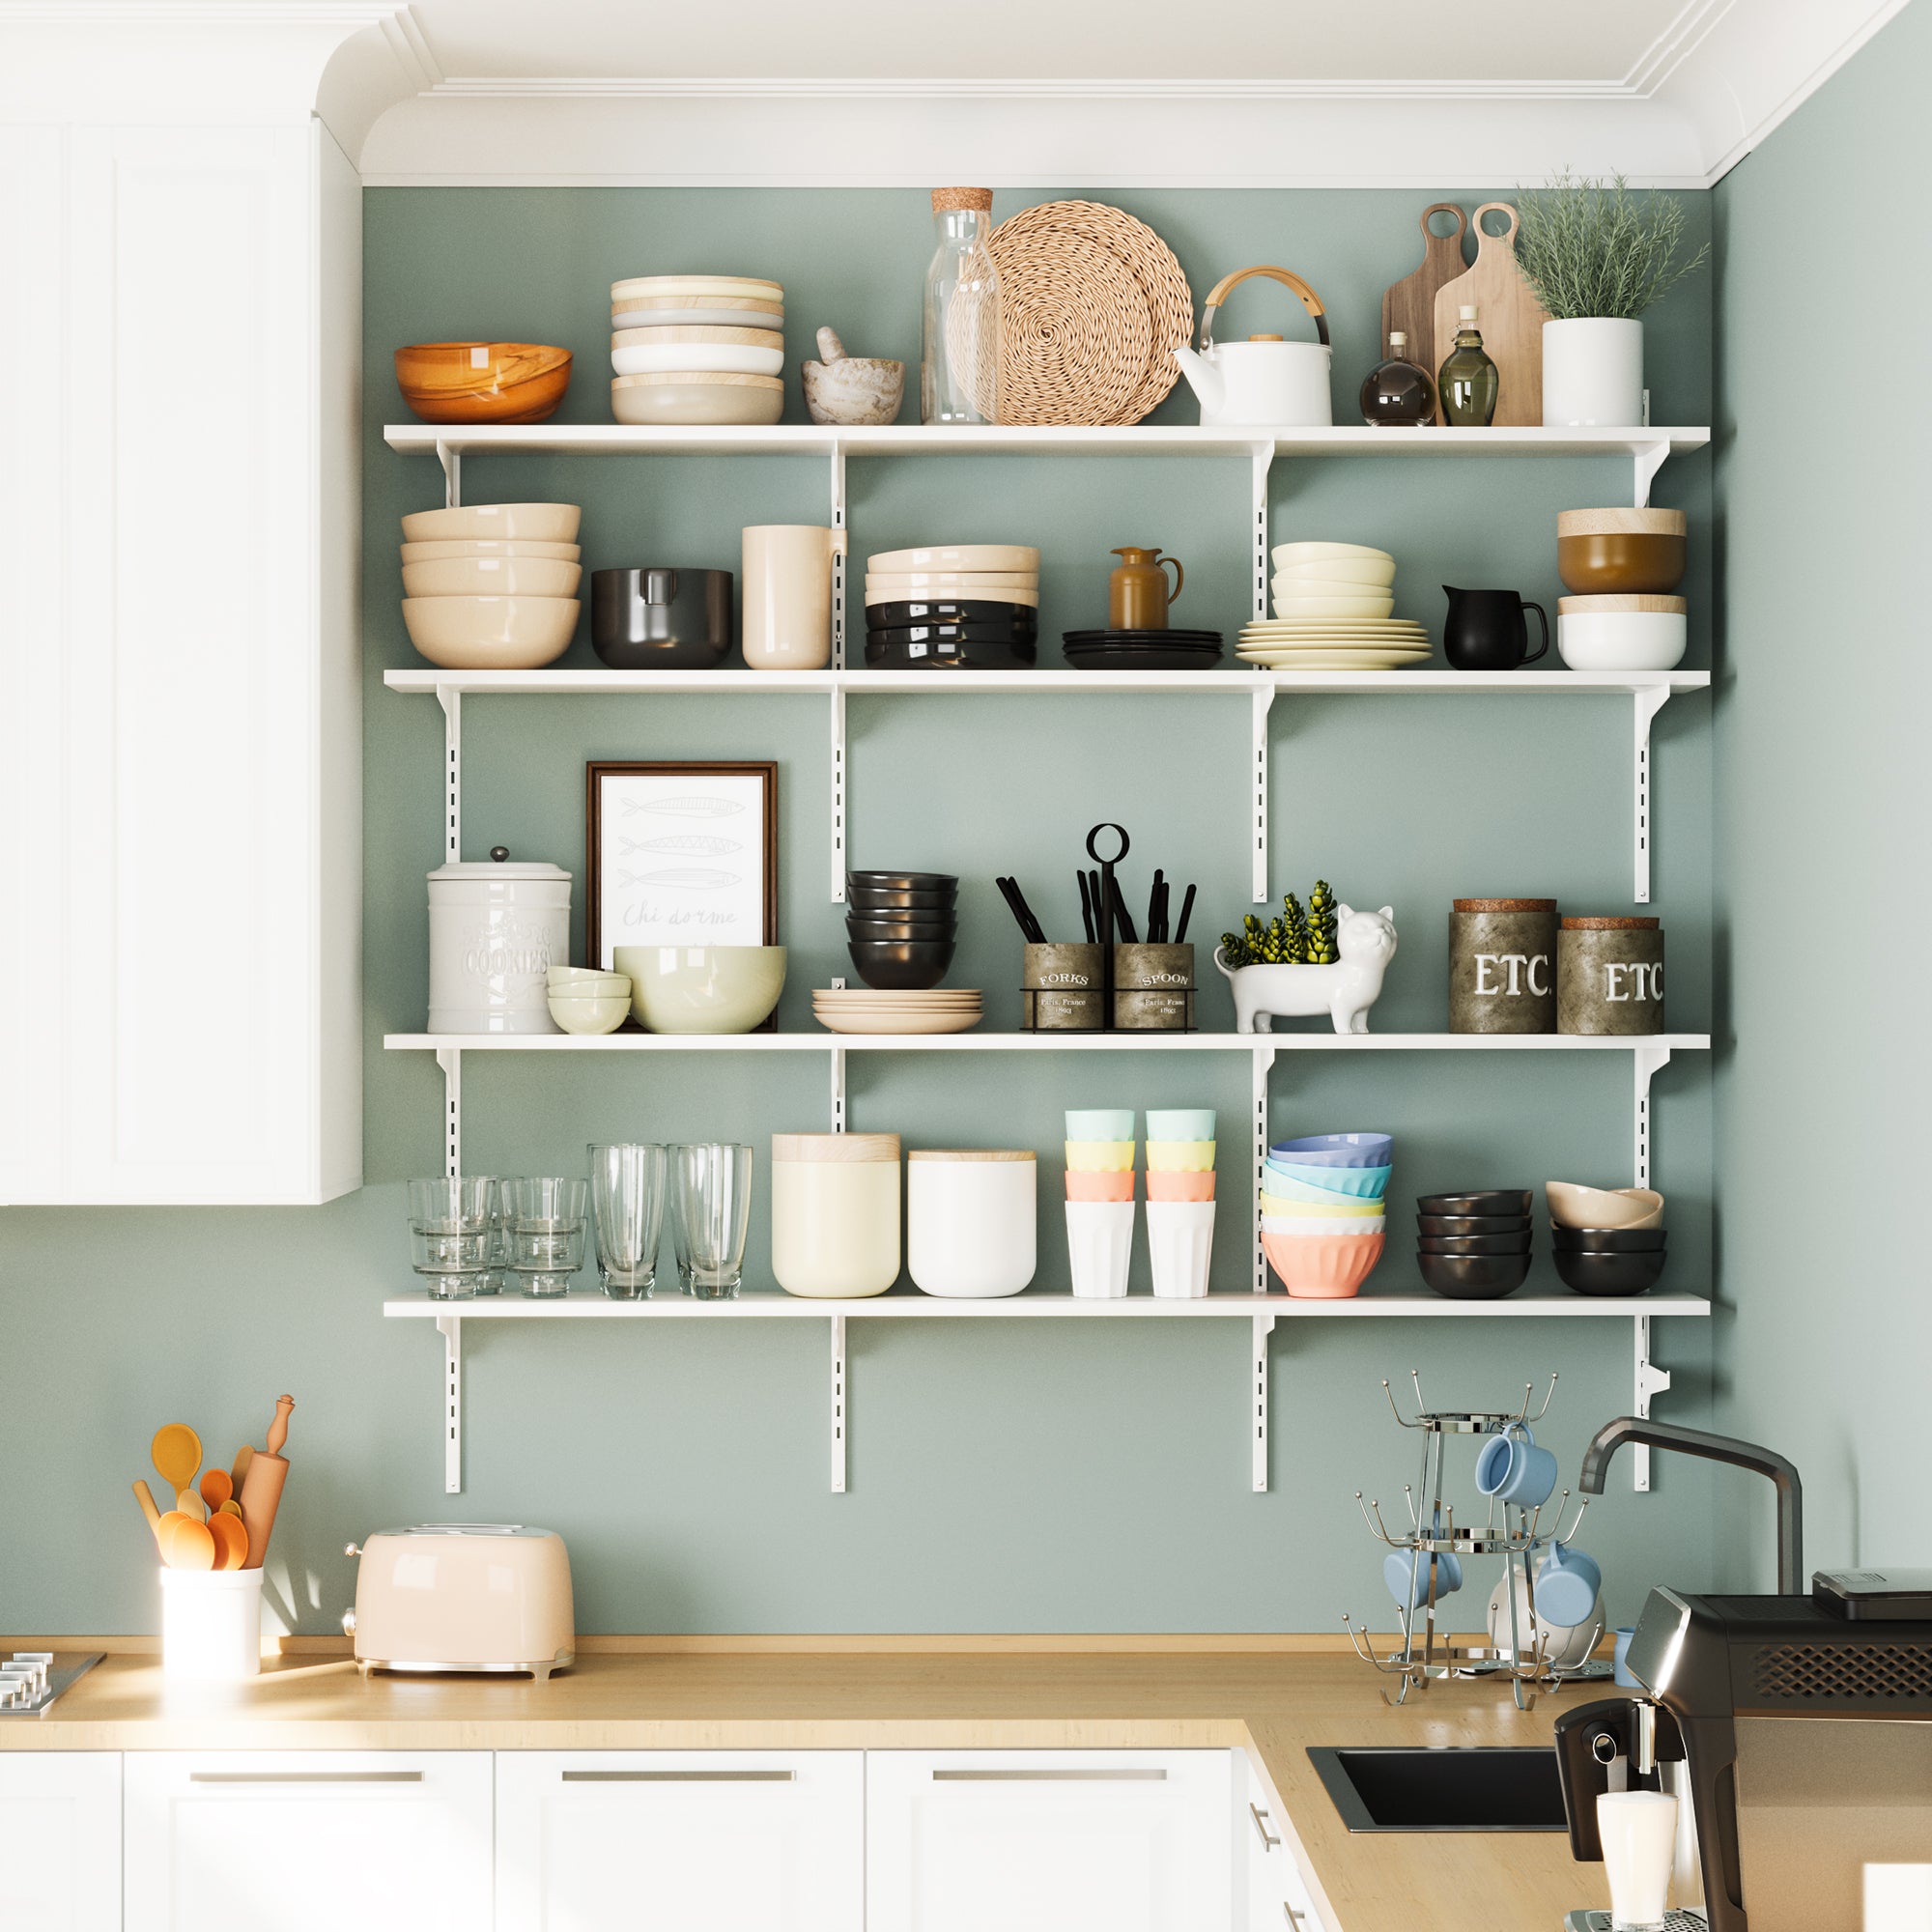 60'' wall mounted shelves white filled with kitchenware and plants, giving off a neat and homey kitchen vibe.